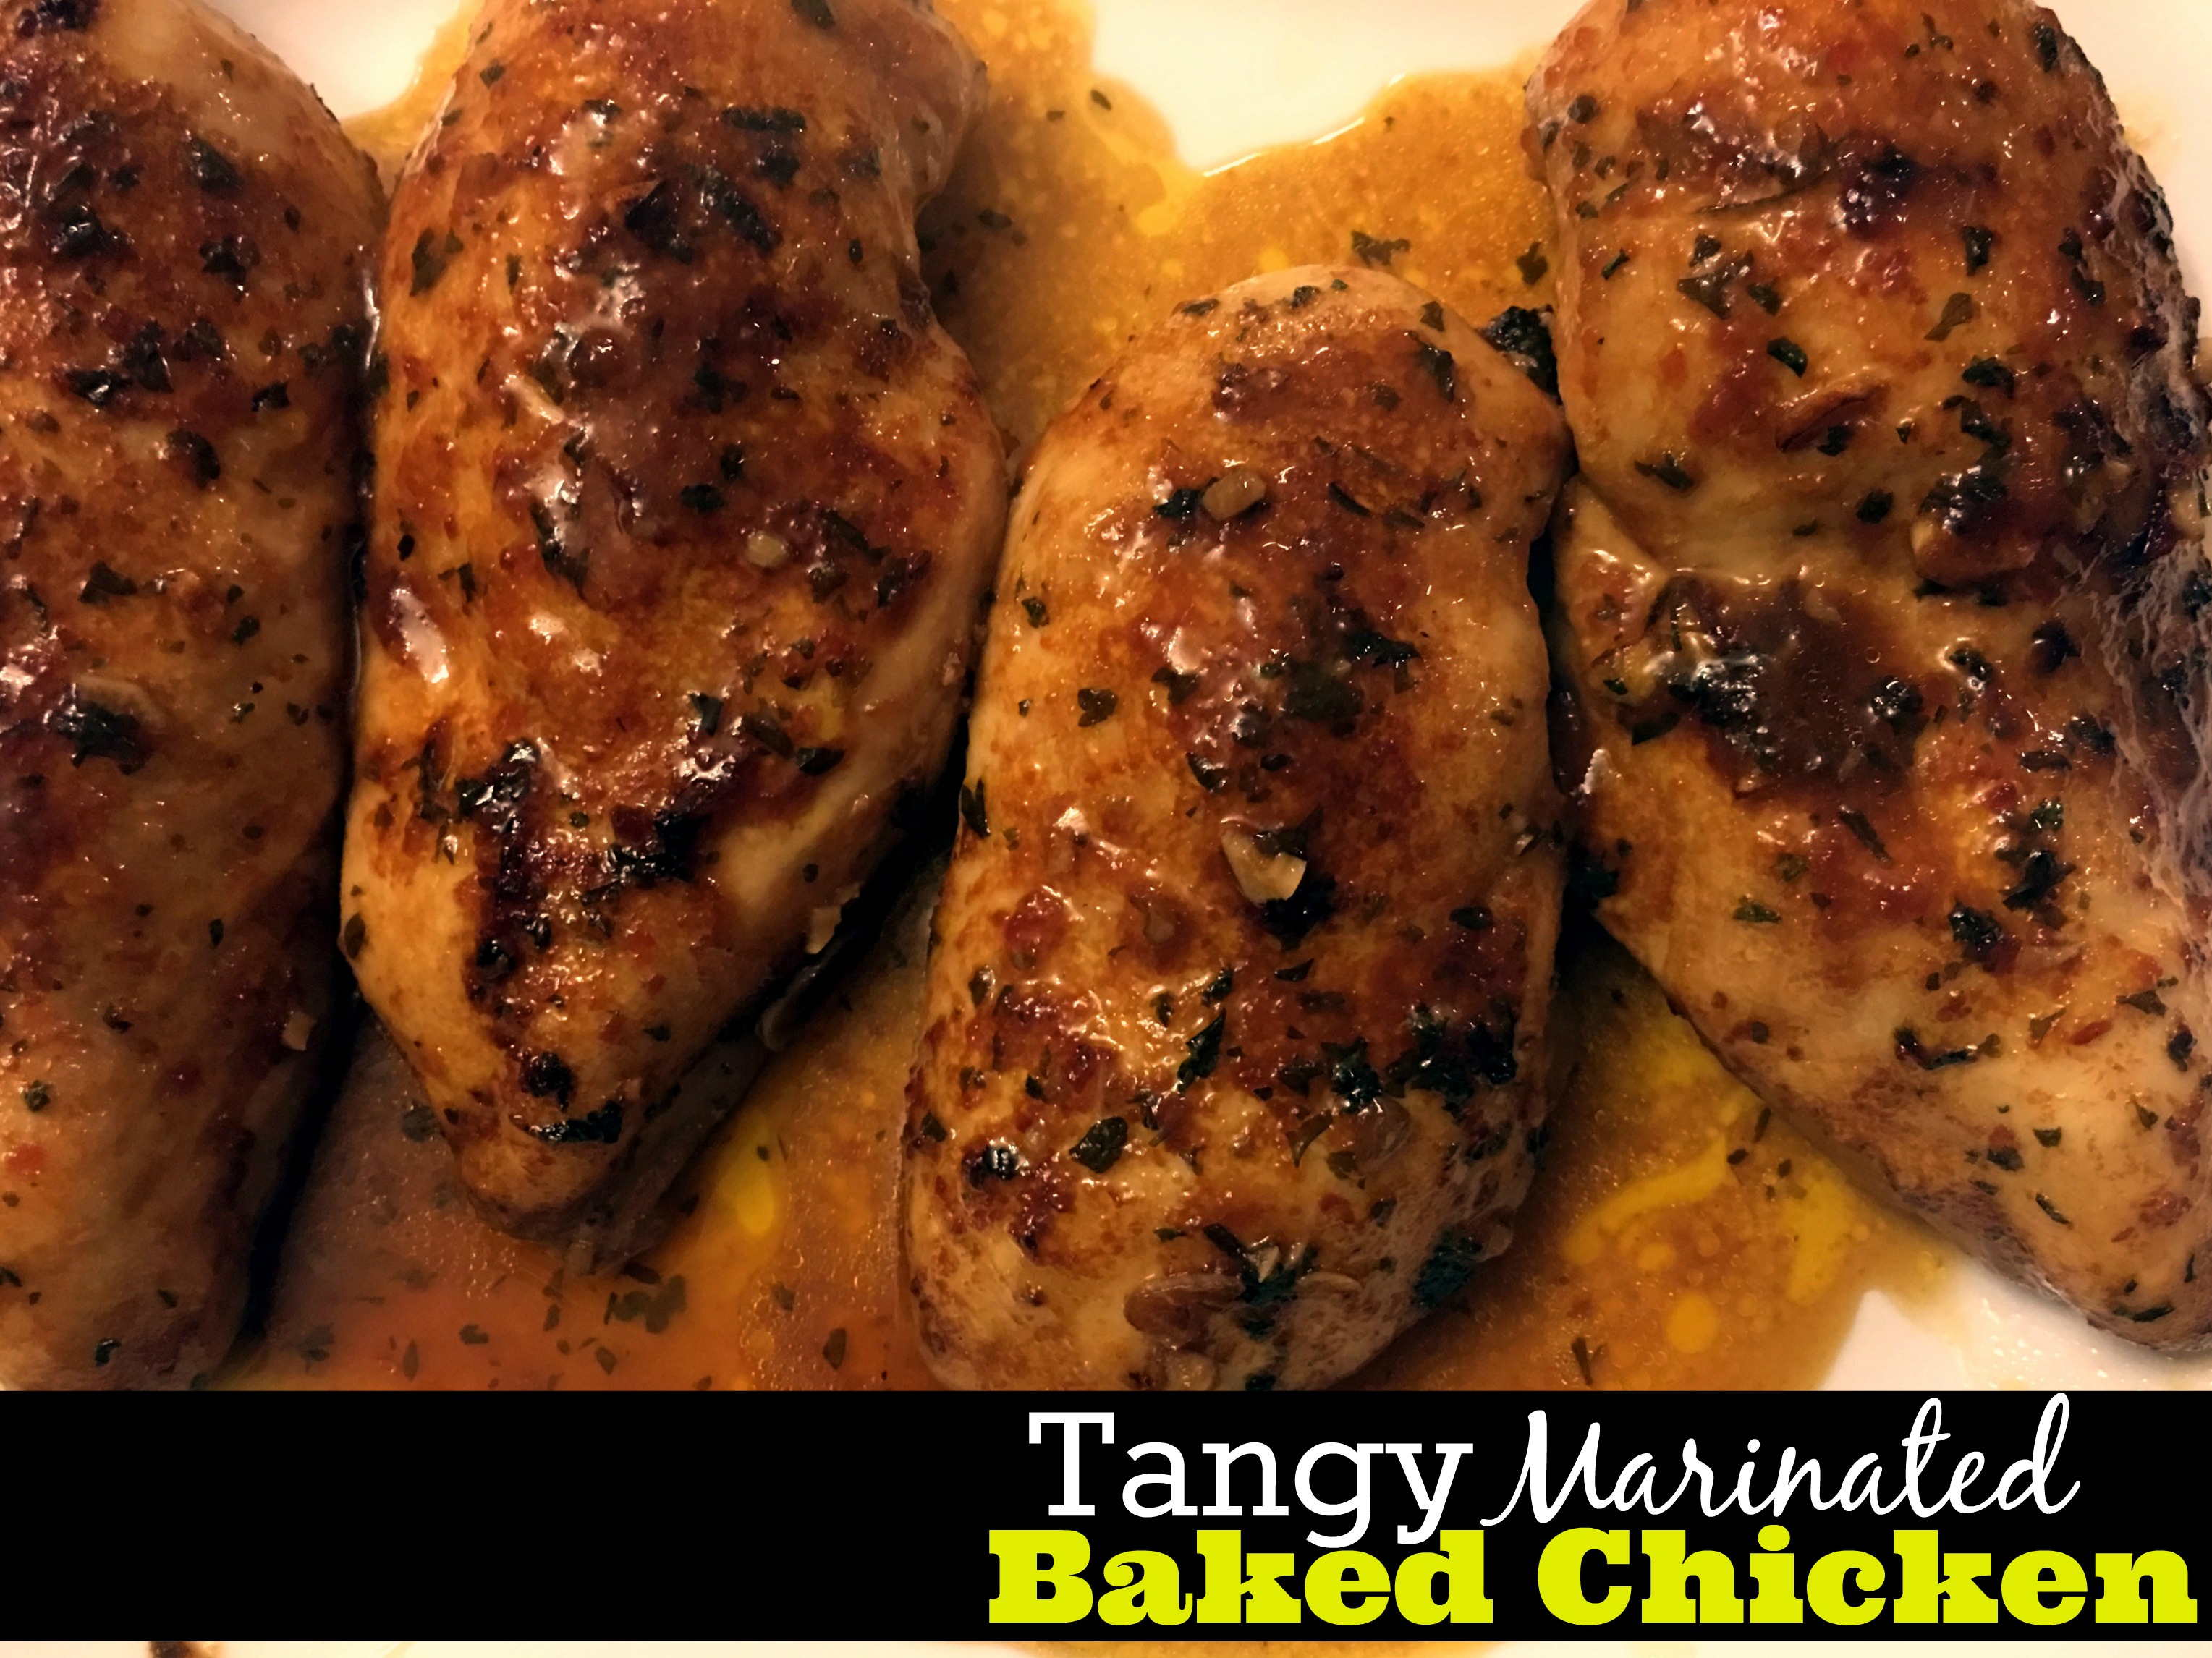 Tangy Marinated Baked Chicken